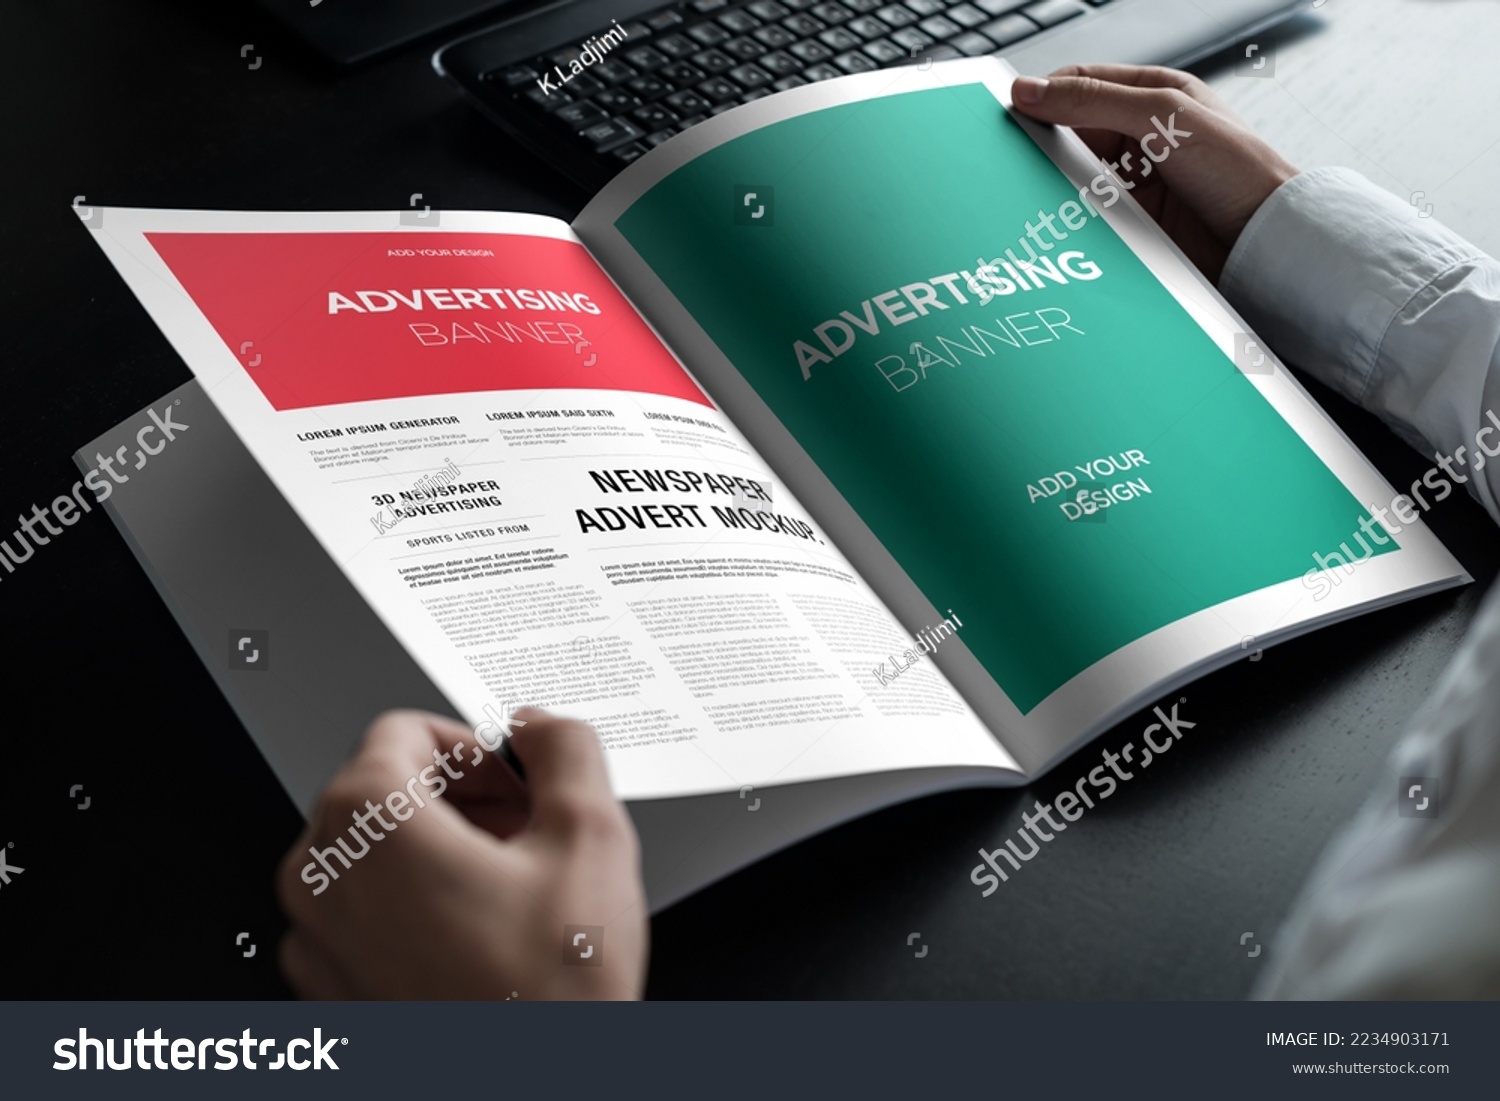 Advertising Banner on Magazine, Brochure Mockup With Hands #2234903171